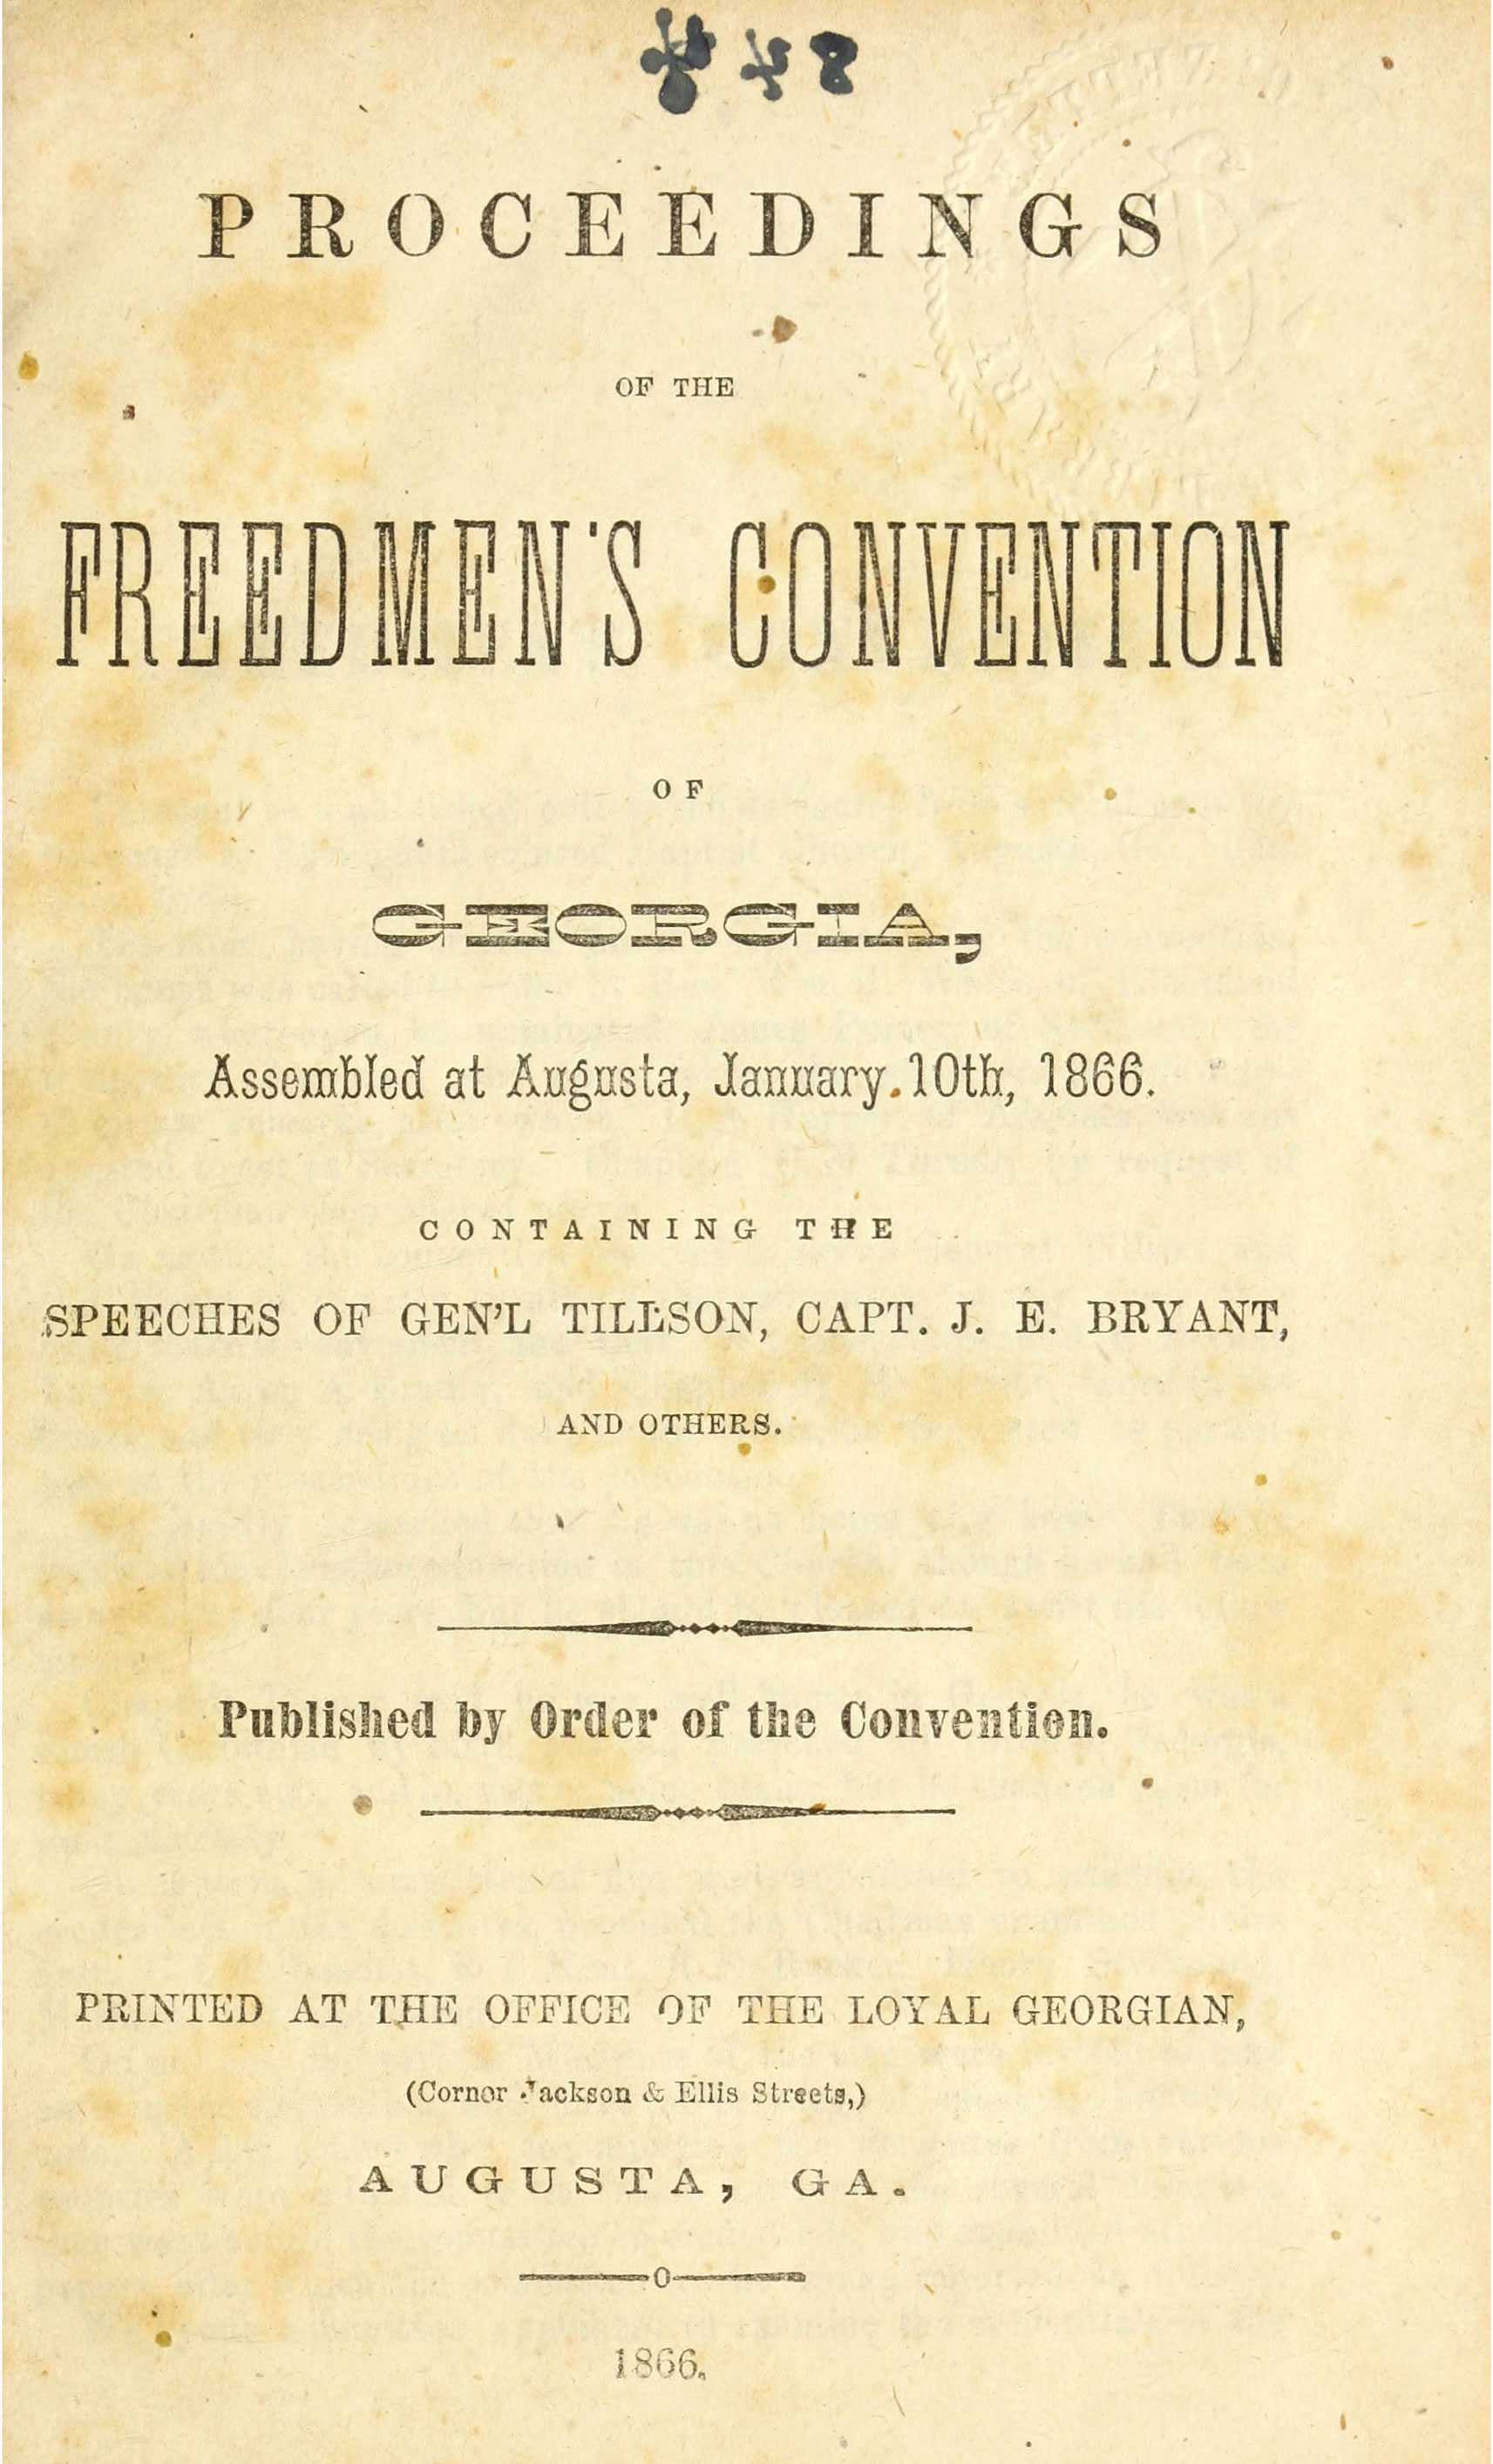 A slightly spotted yellowed paper, titled with Proceeding of the Freedmen's Convention with formal typeface.